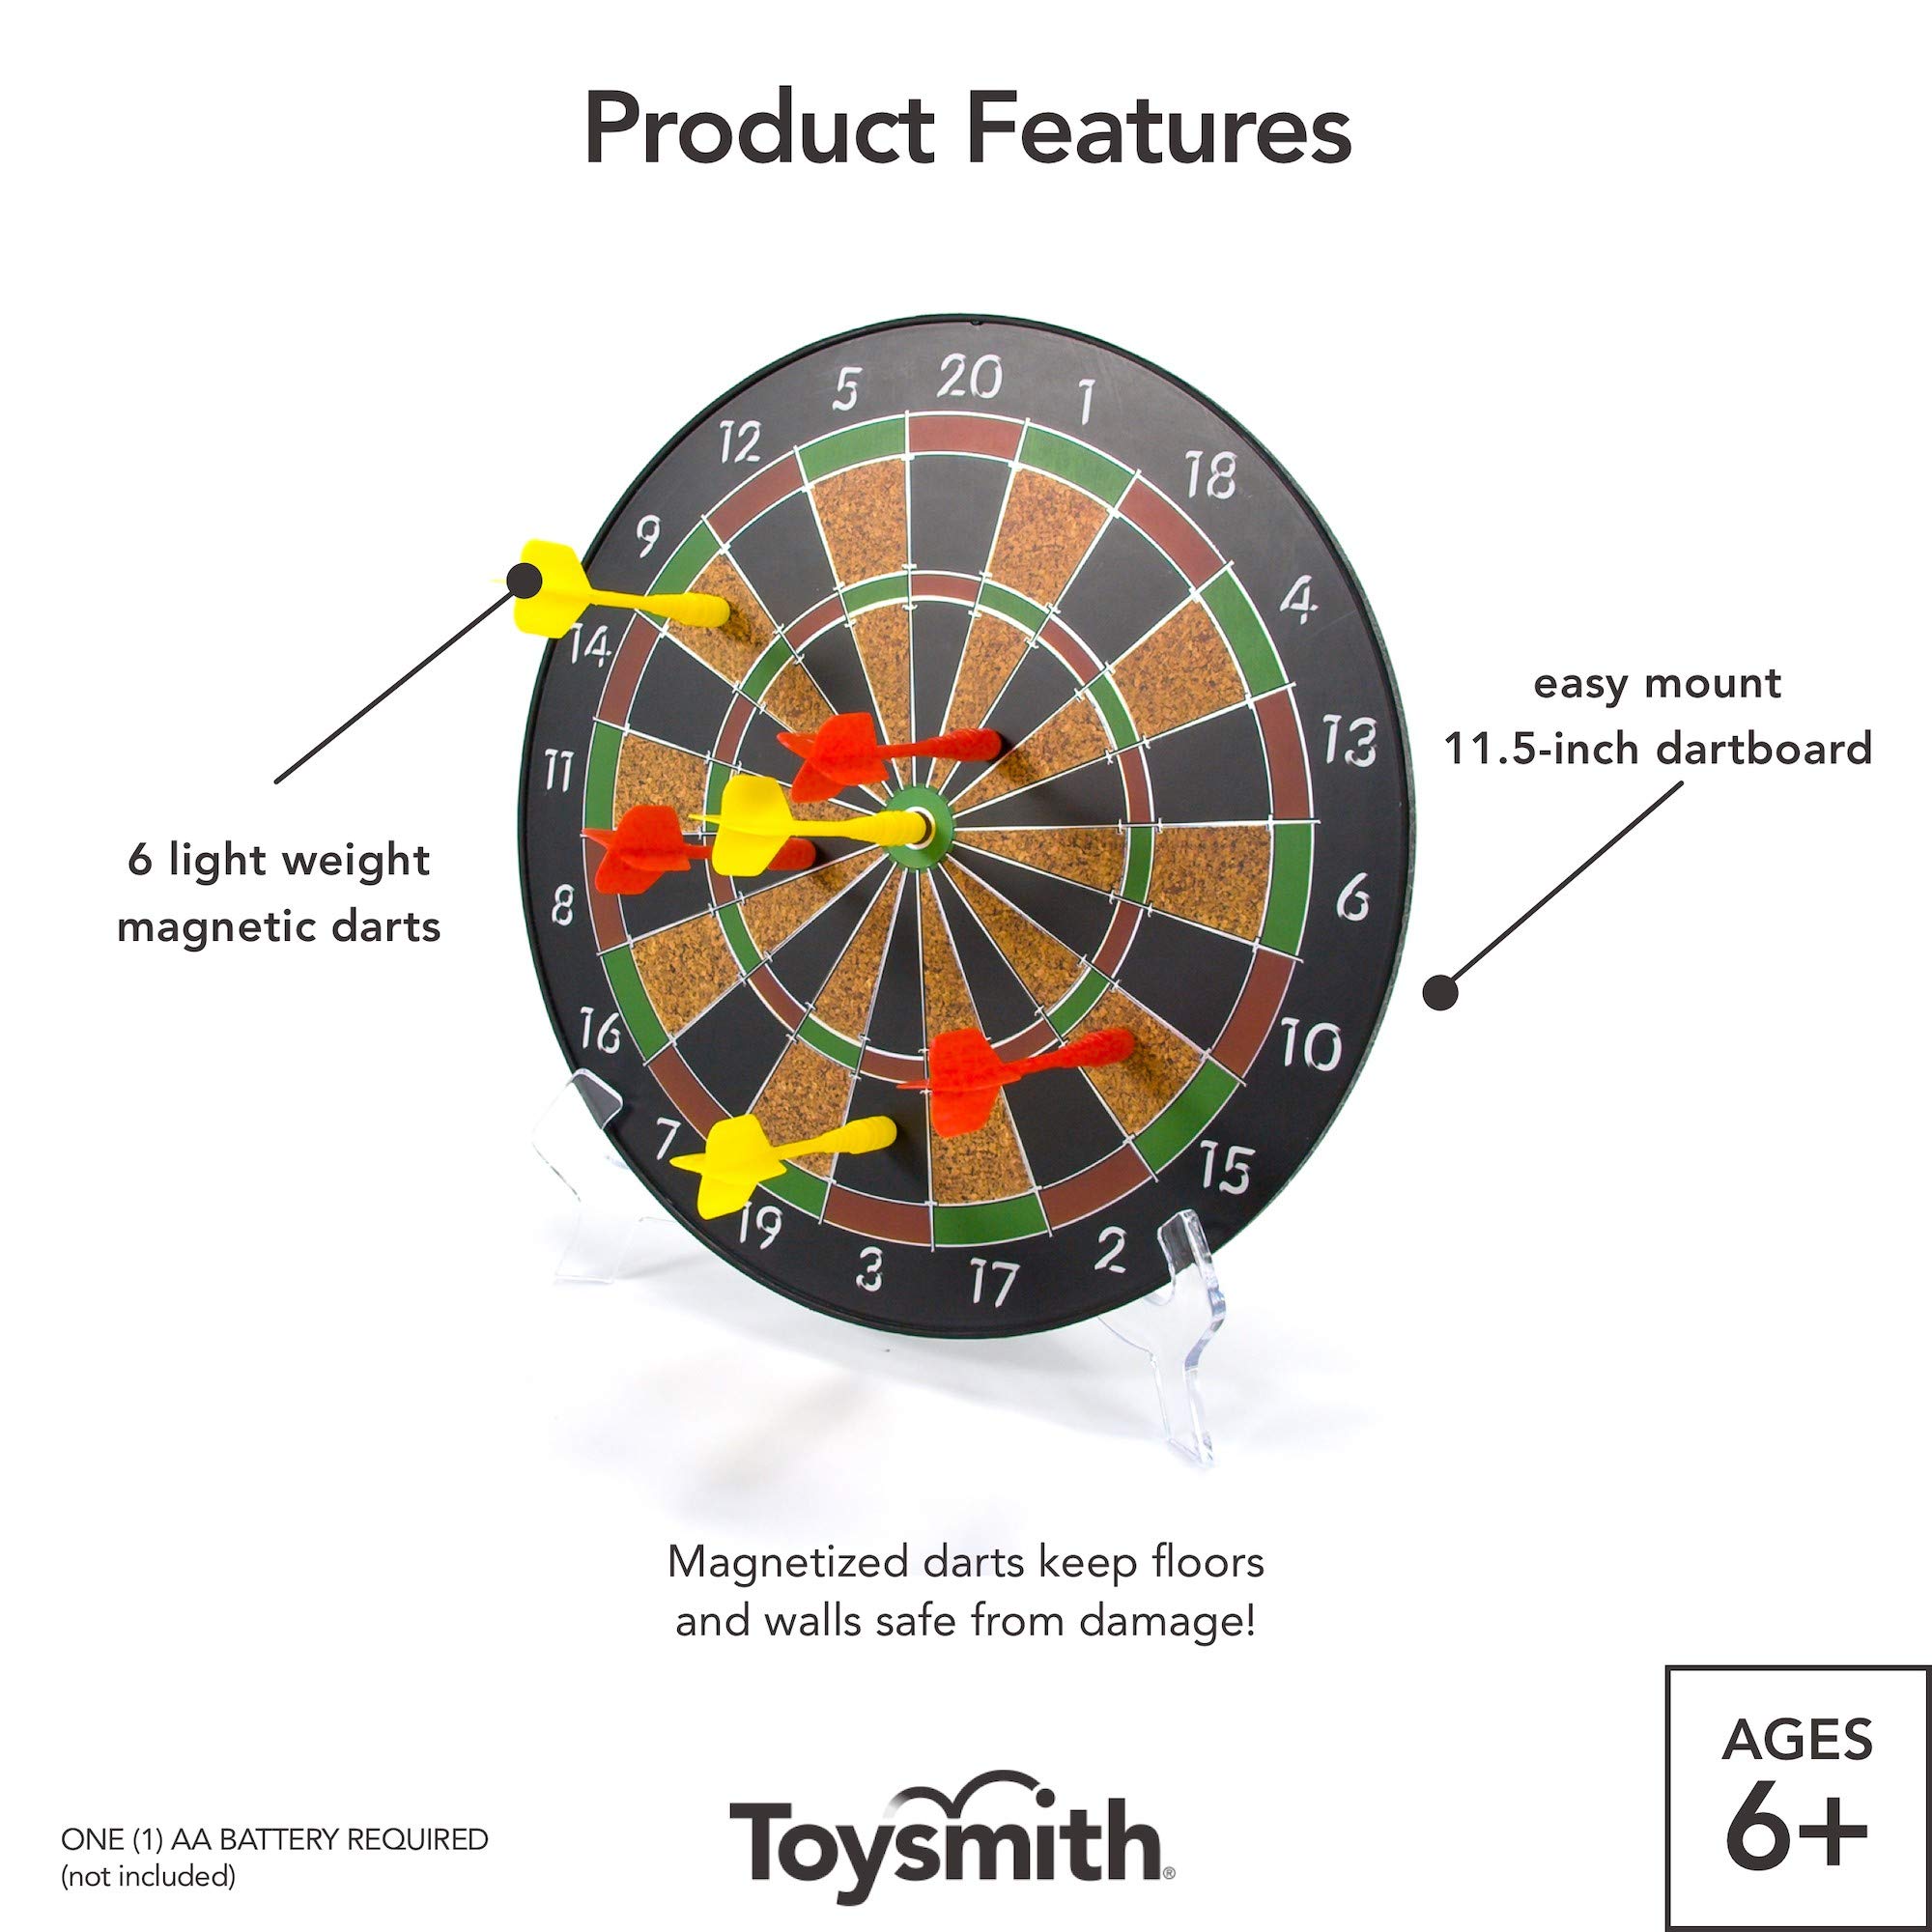 Toysmith Magnetic Dart Board Play Indoor or Outdoor Games, For Boys & Girls Ages 6+